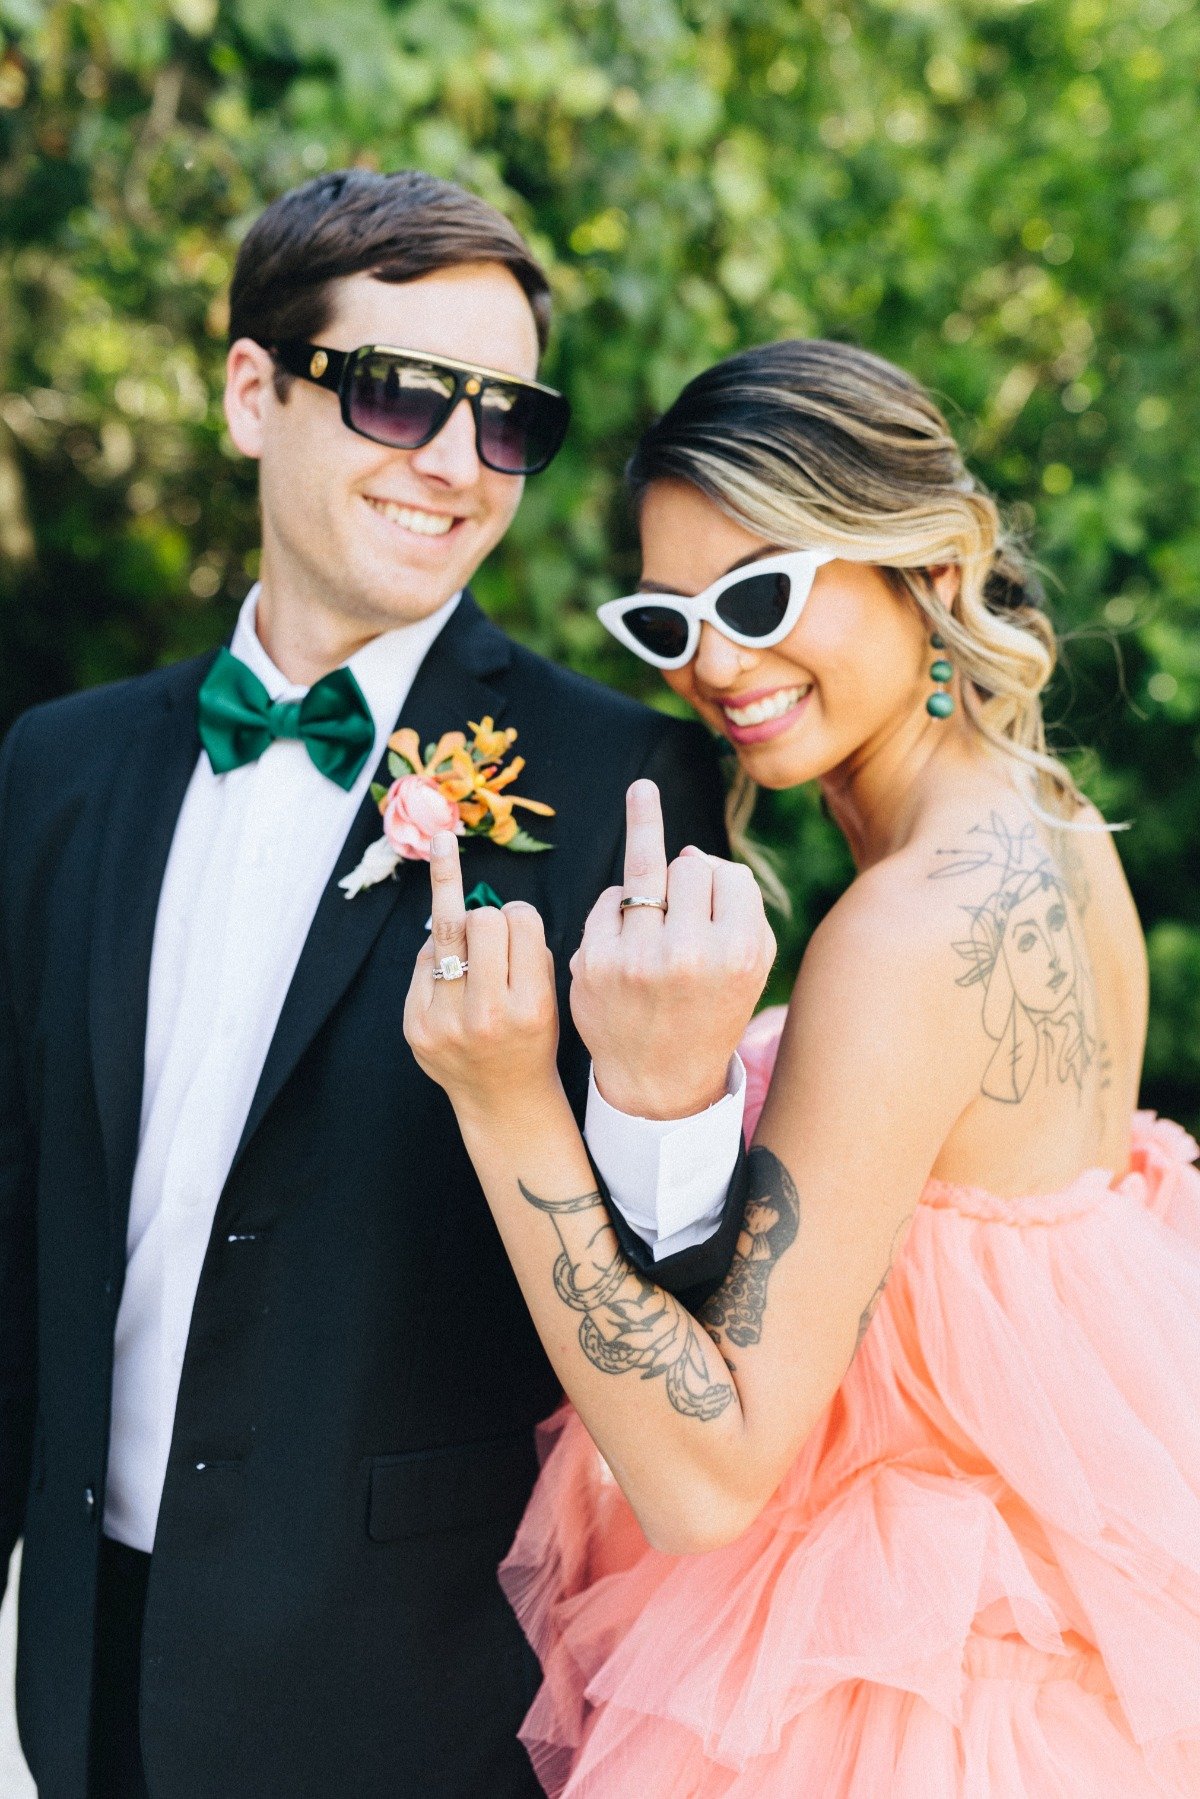 Bride and groom wearing sunglasses and showing wedding rings